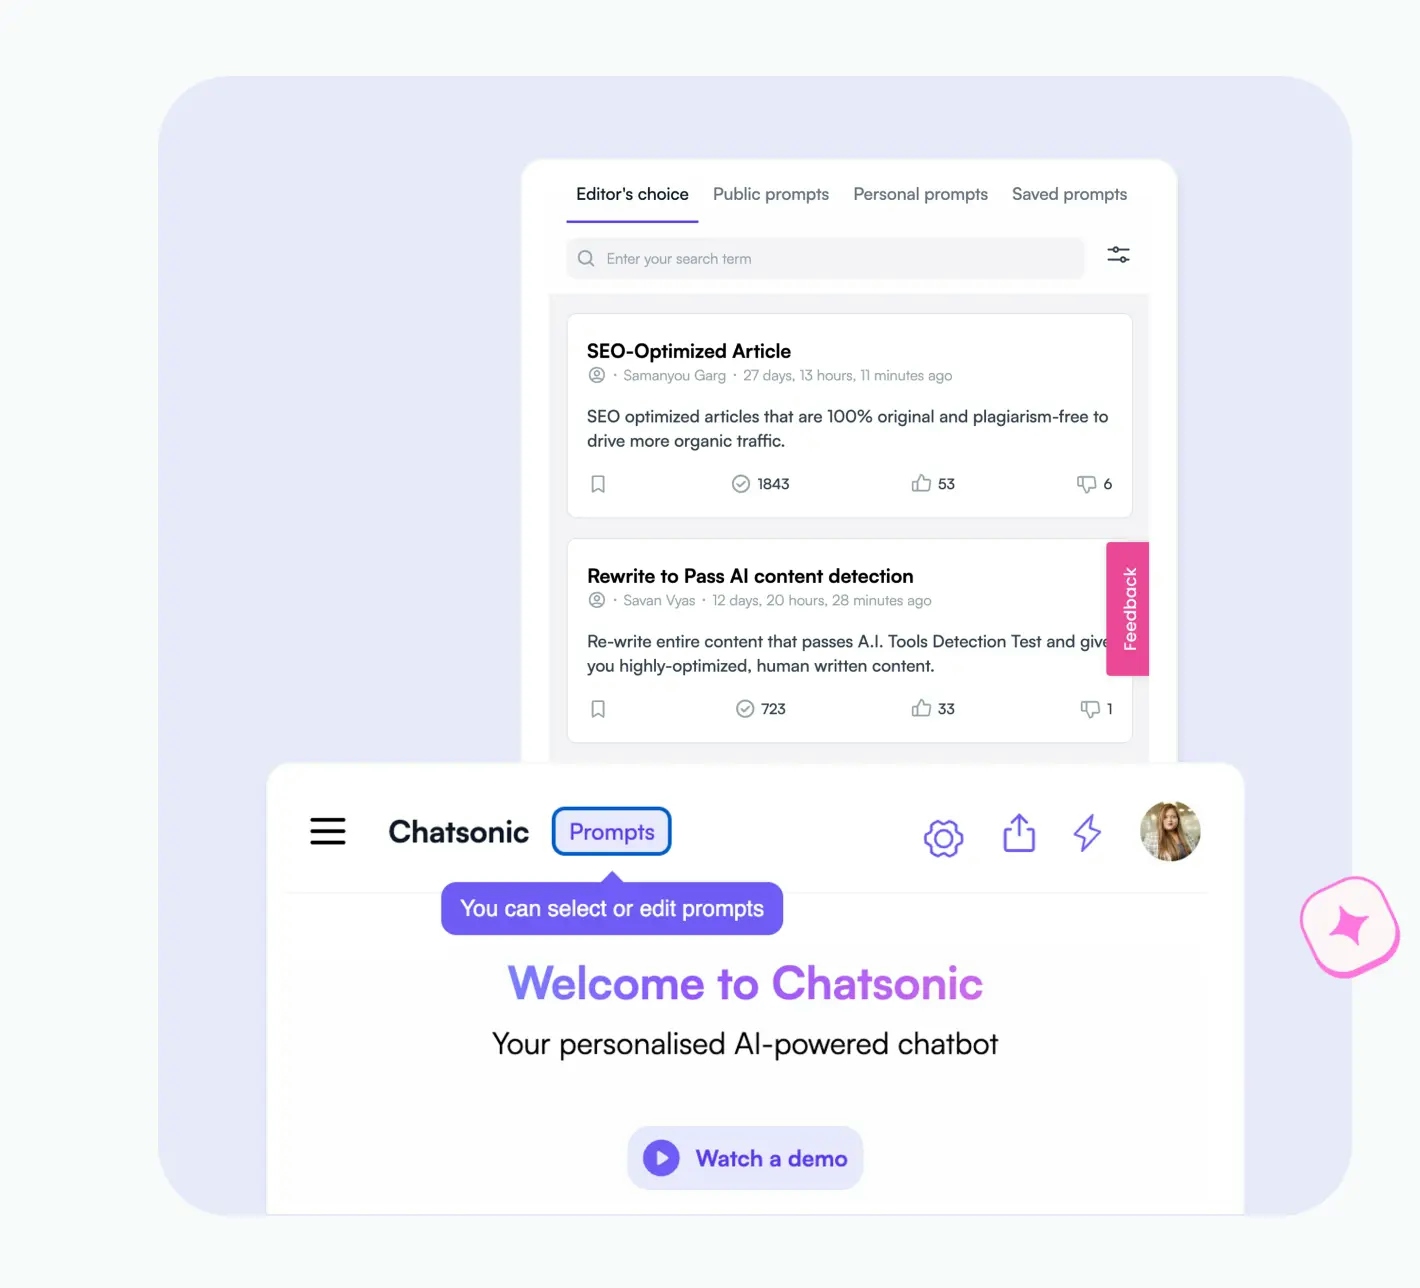 Visit Chatsonic’s prompt marketplace without changing tabs for AI prompt inspiration.